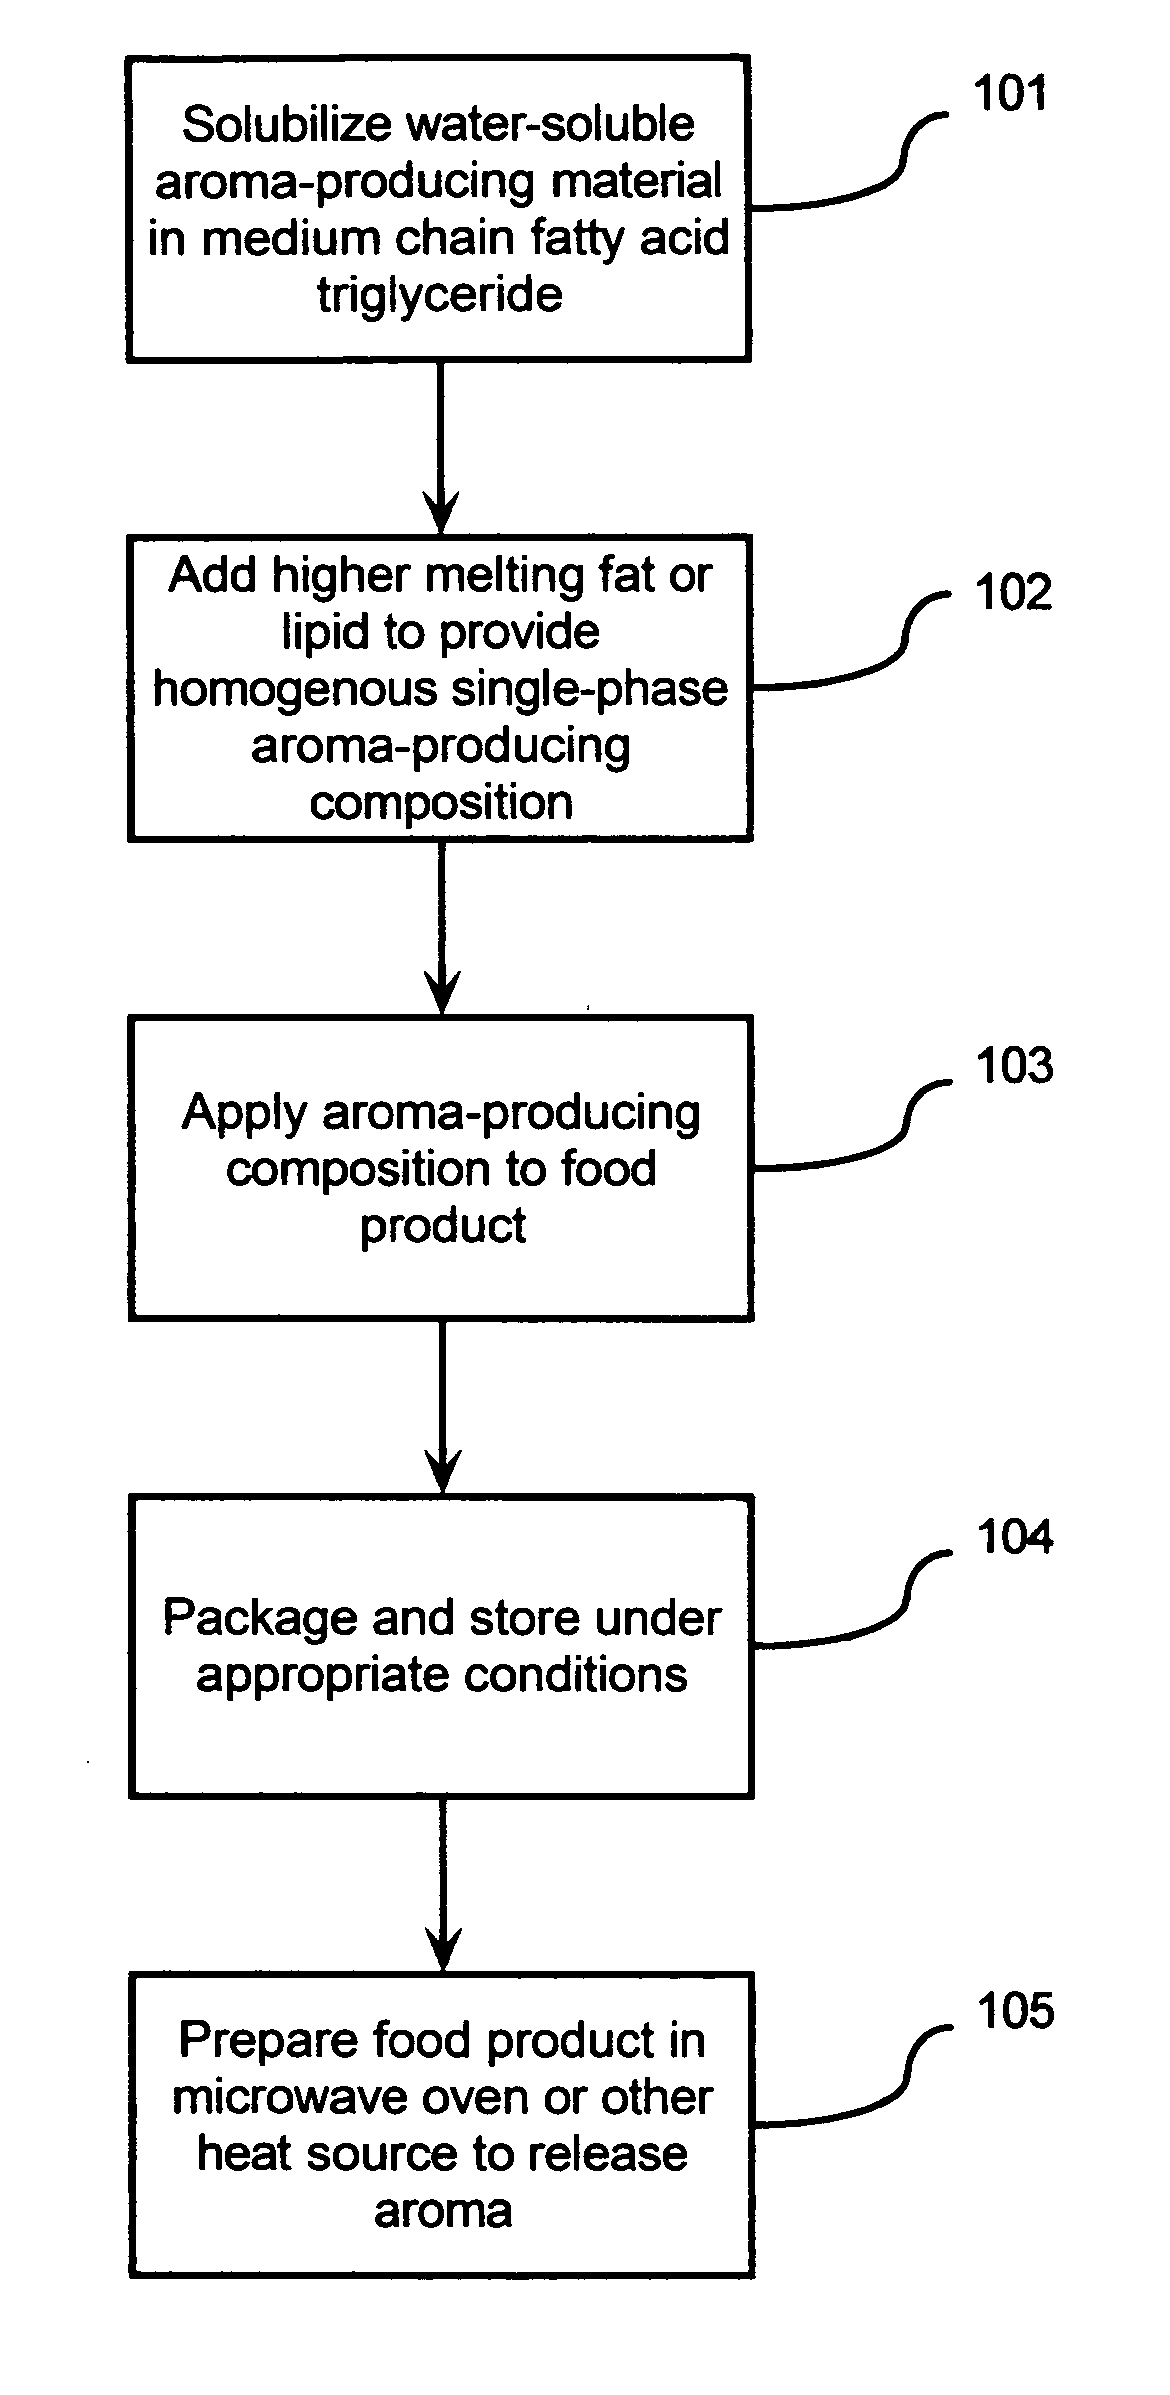 Aroma-producing compositions for foods